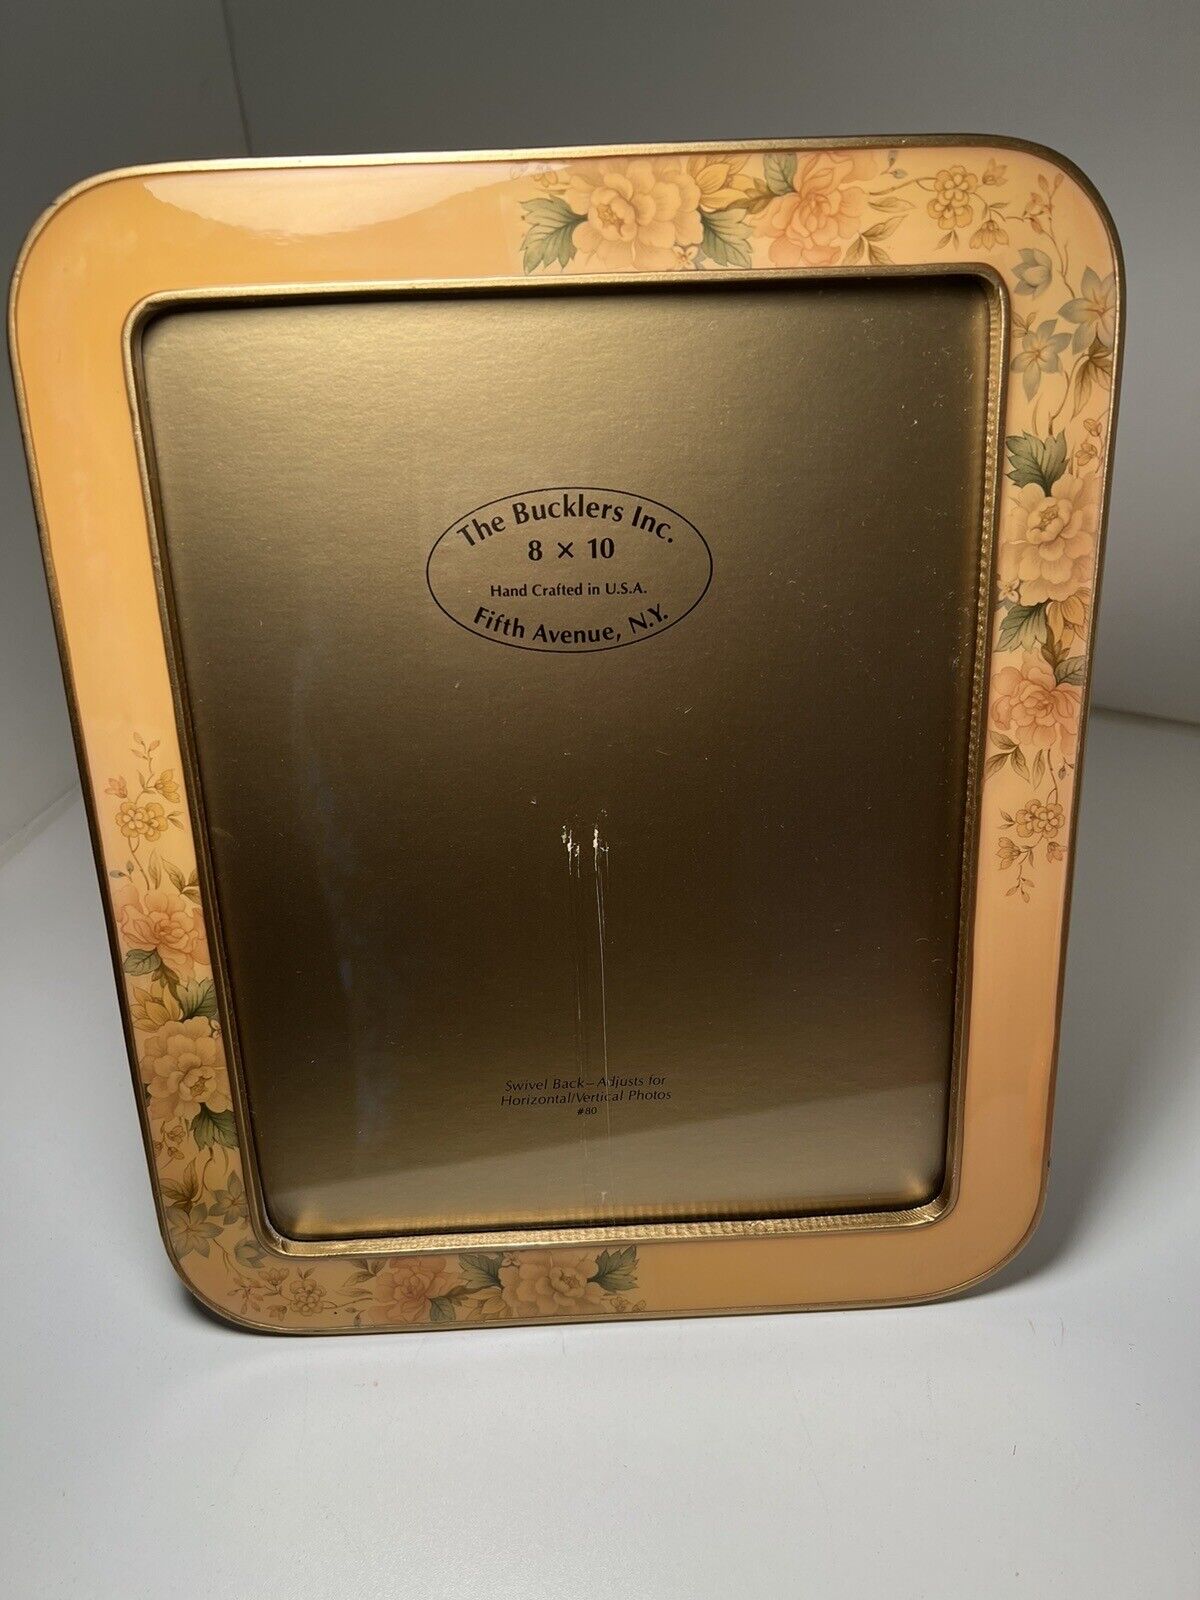 Bucklers Inc. 5th Avenue NY 8x10 Enamel Picture Frame